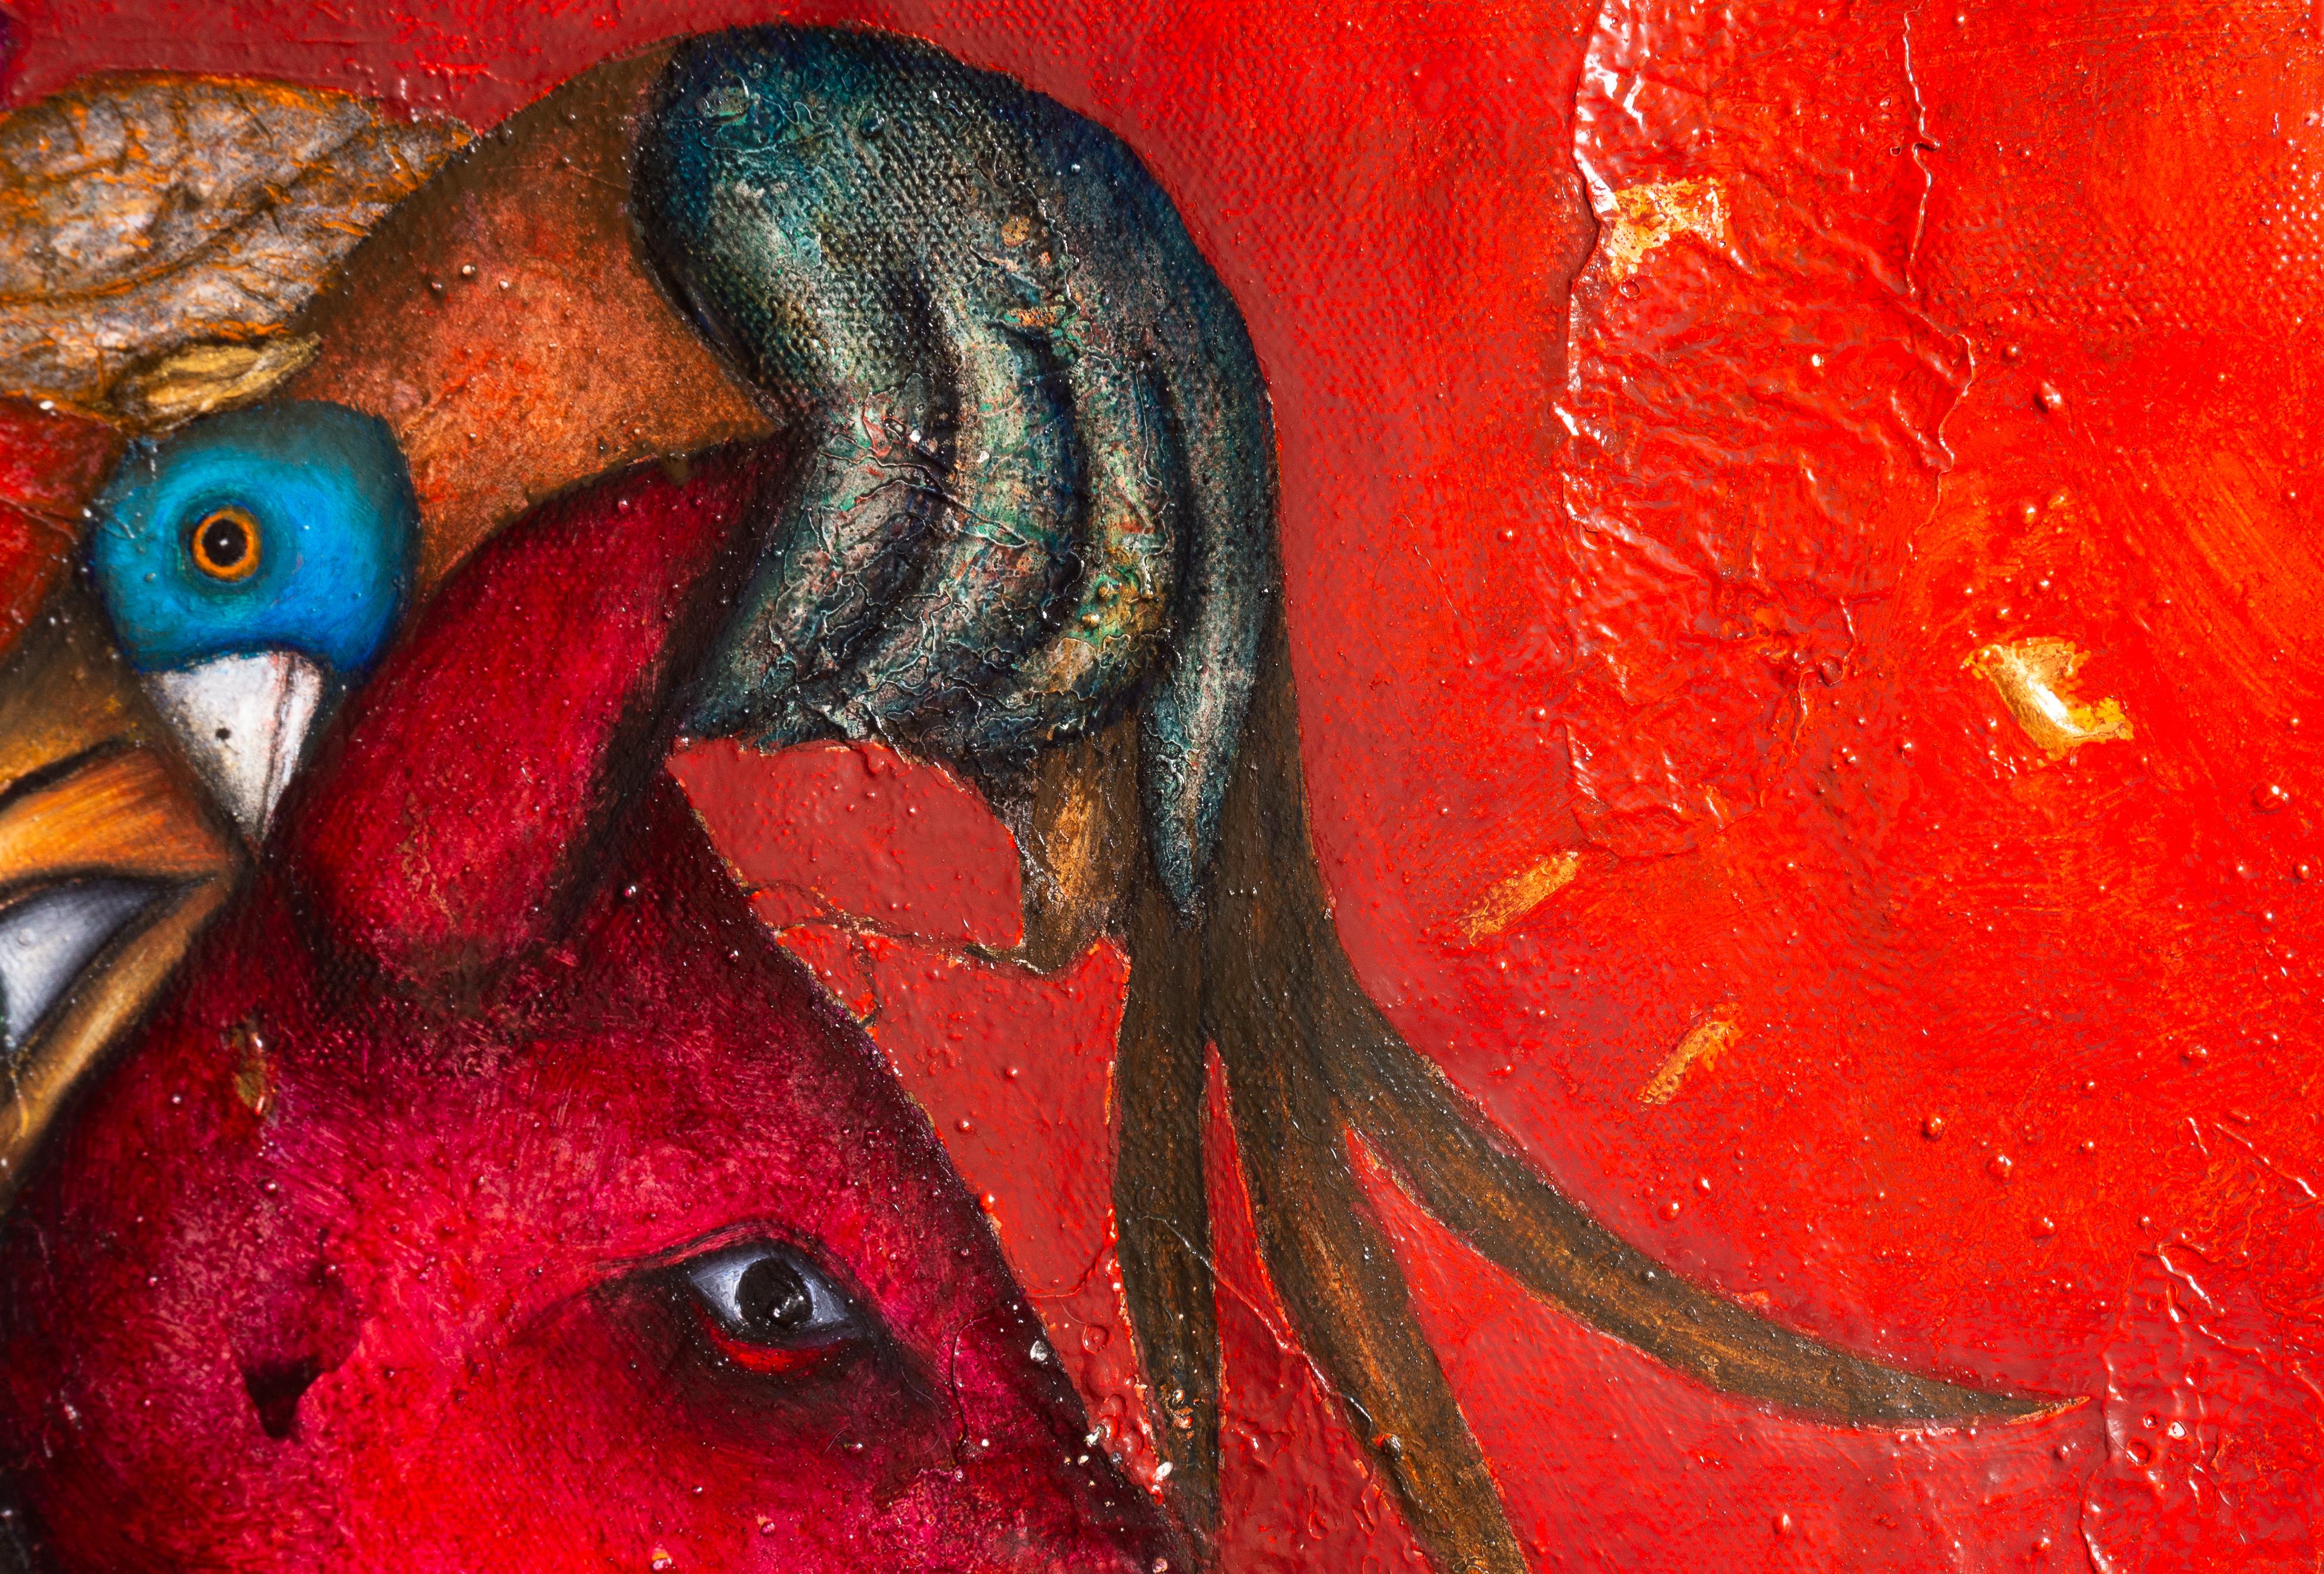 Suspension - Animal figurative magic in red. A shared dream where you and I are one with them.  Painting 24